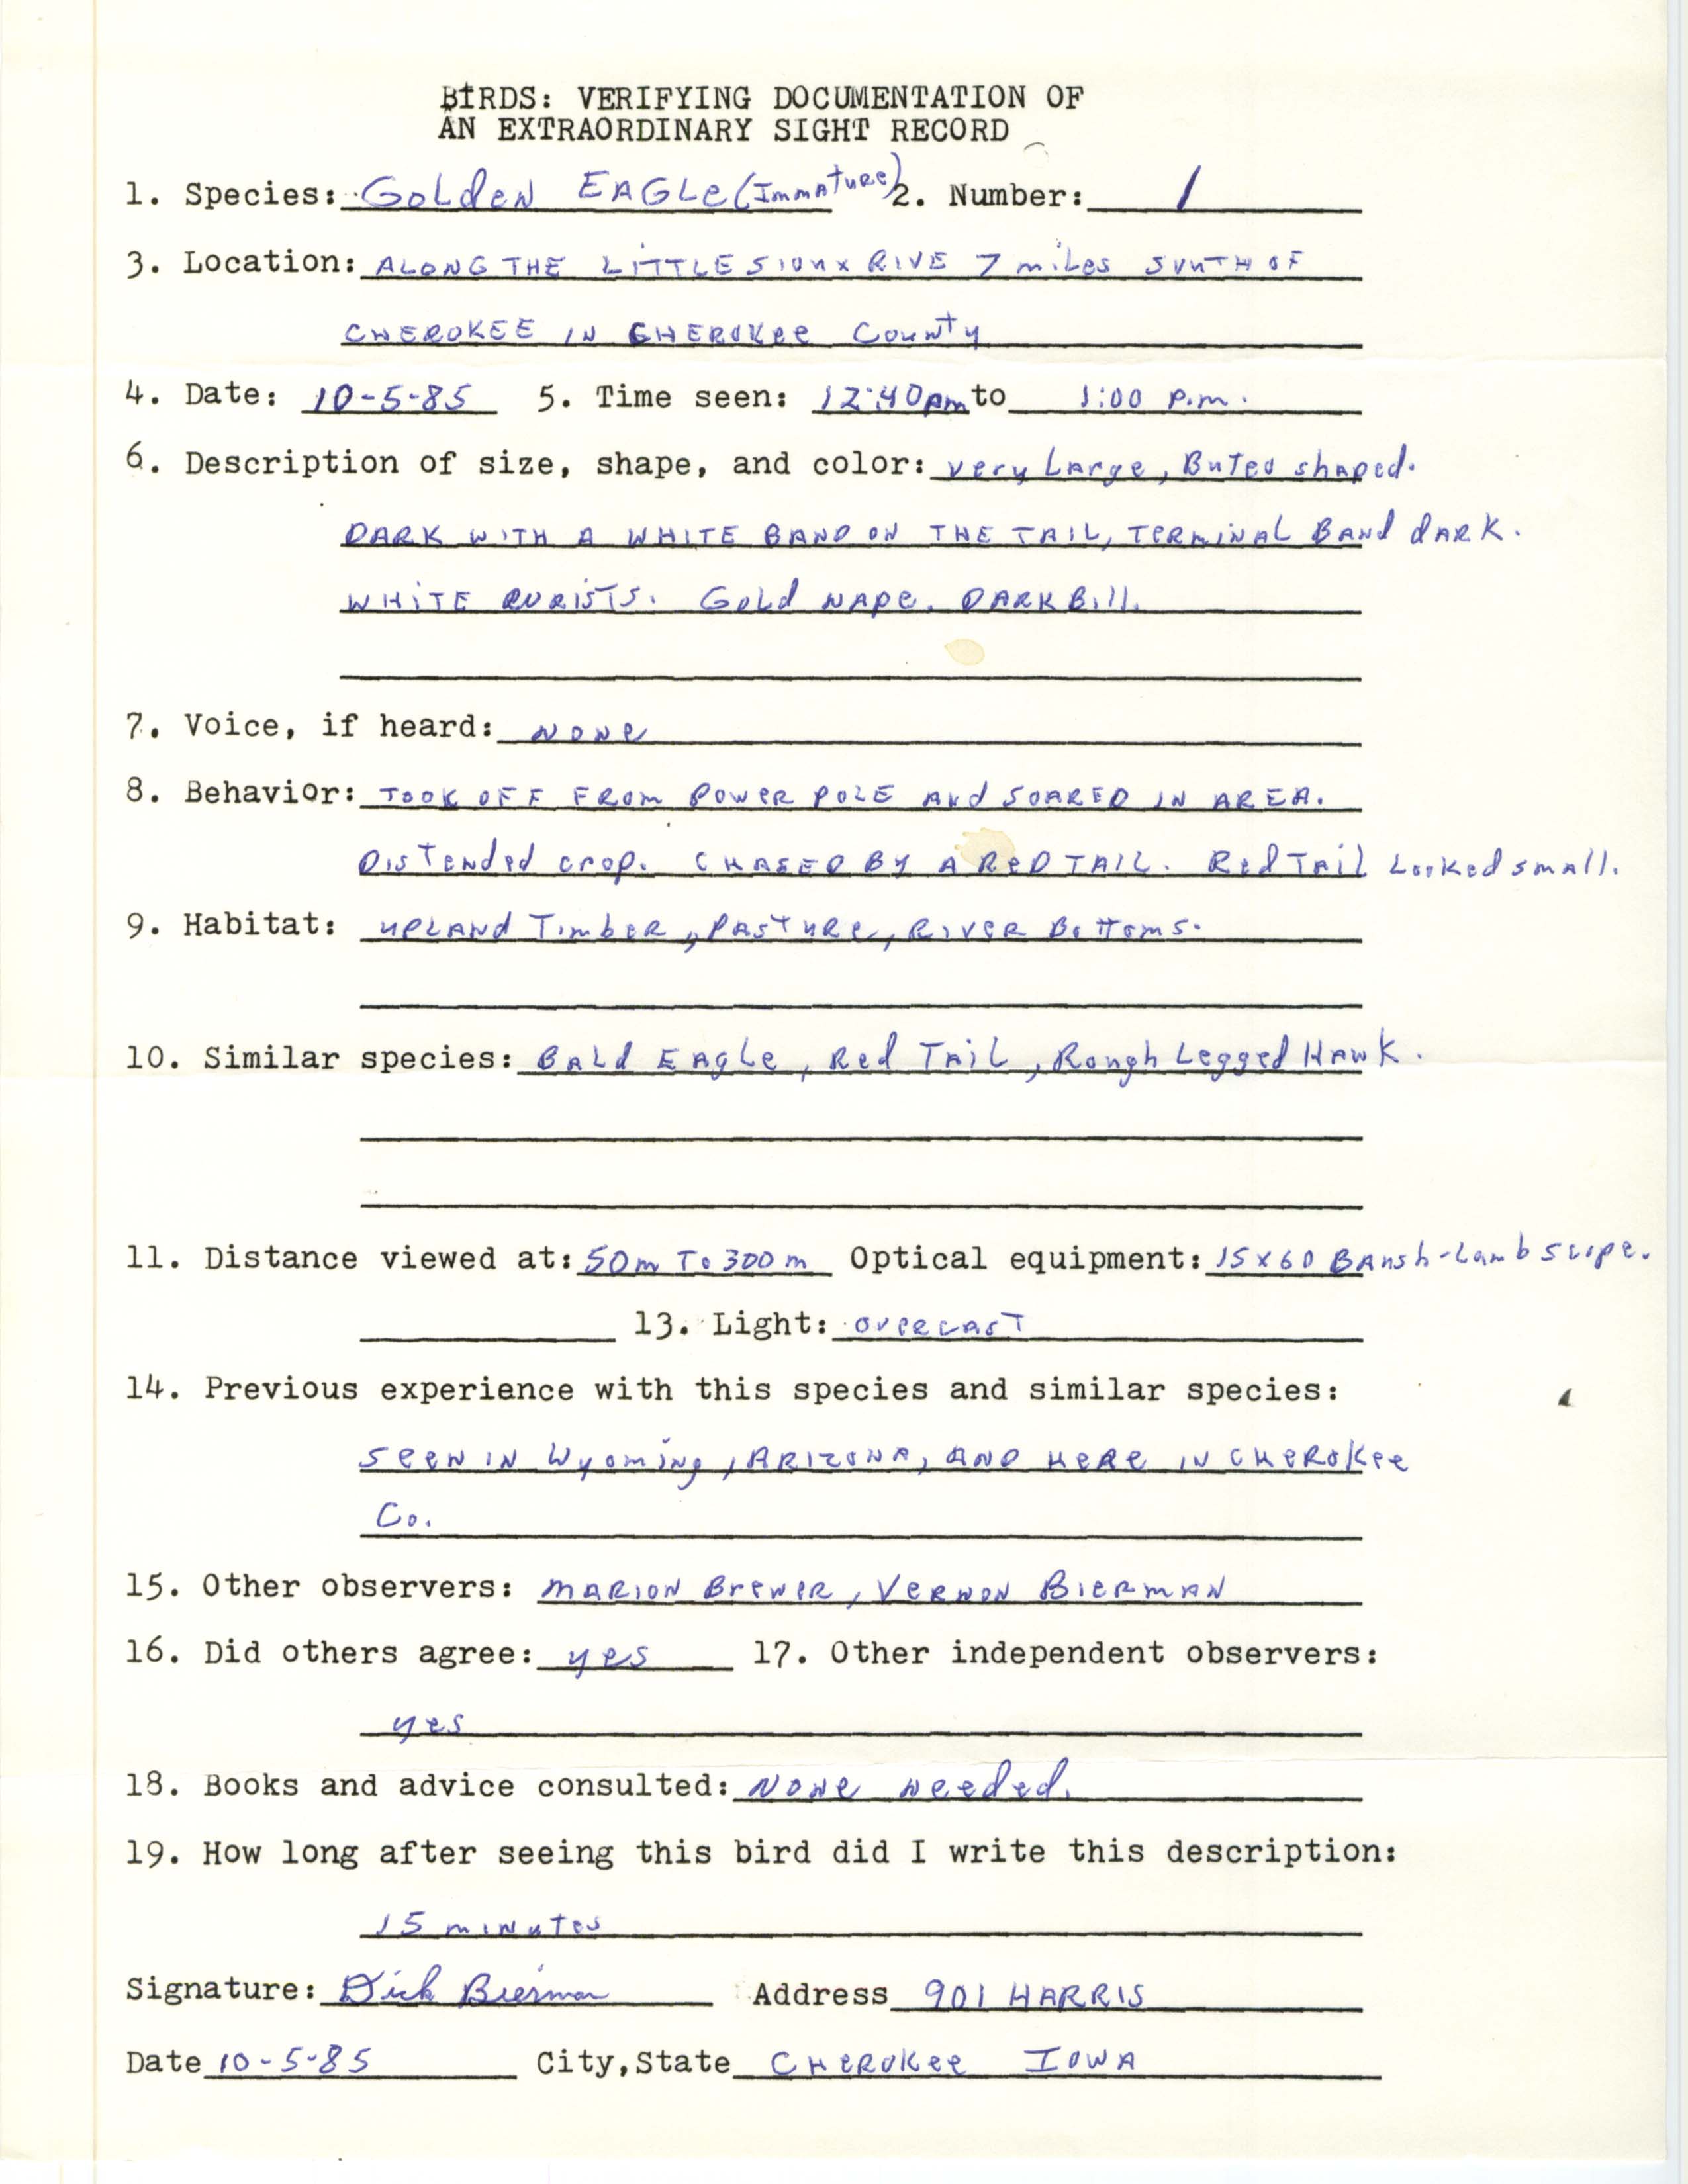 Rare bird documentation form for Golden Eagle on the Little Sioux River south of Cherokee, 1985